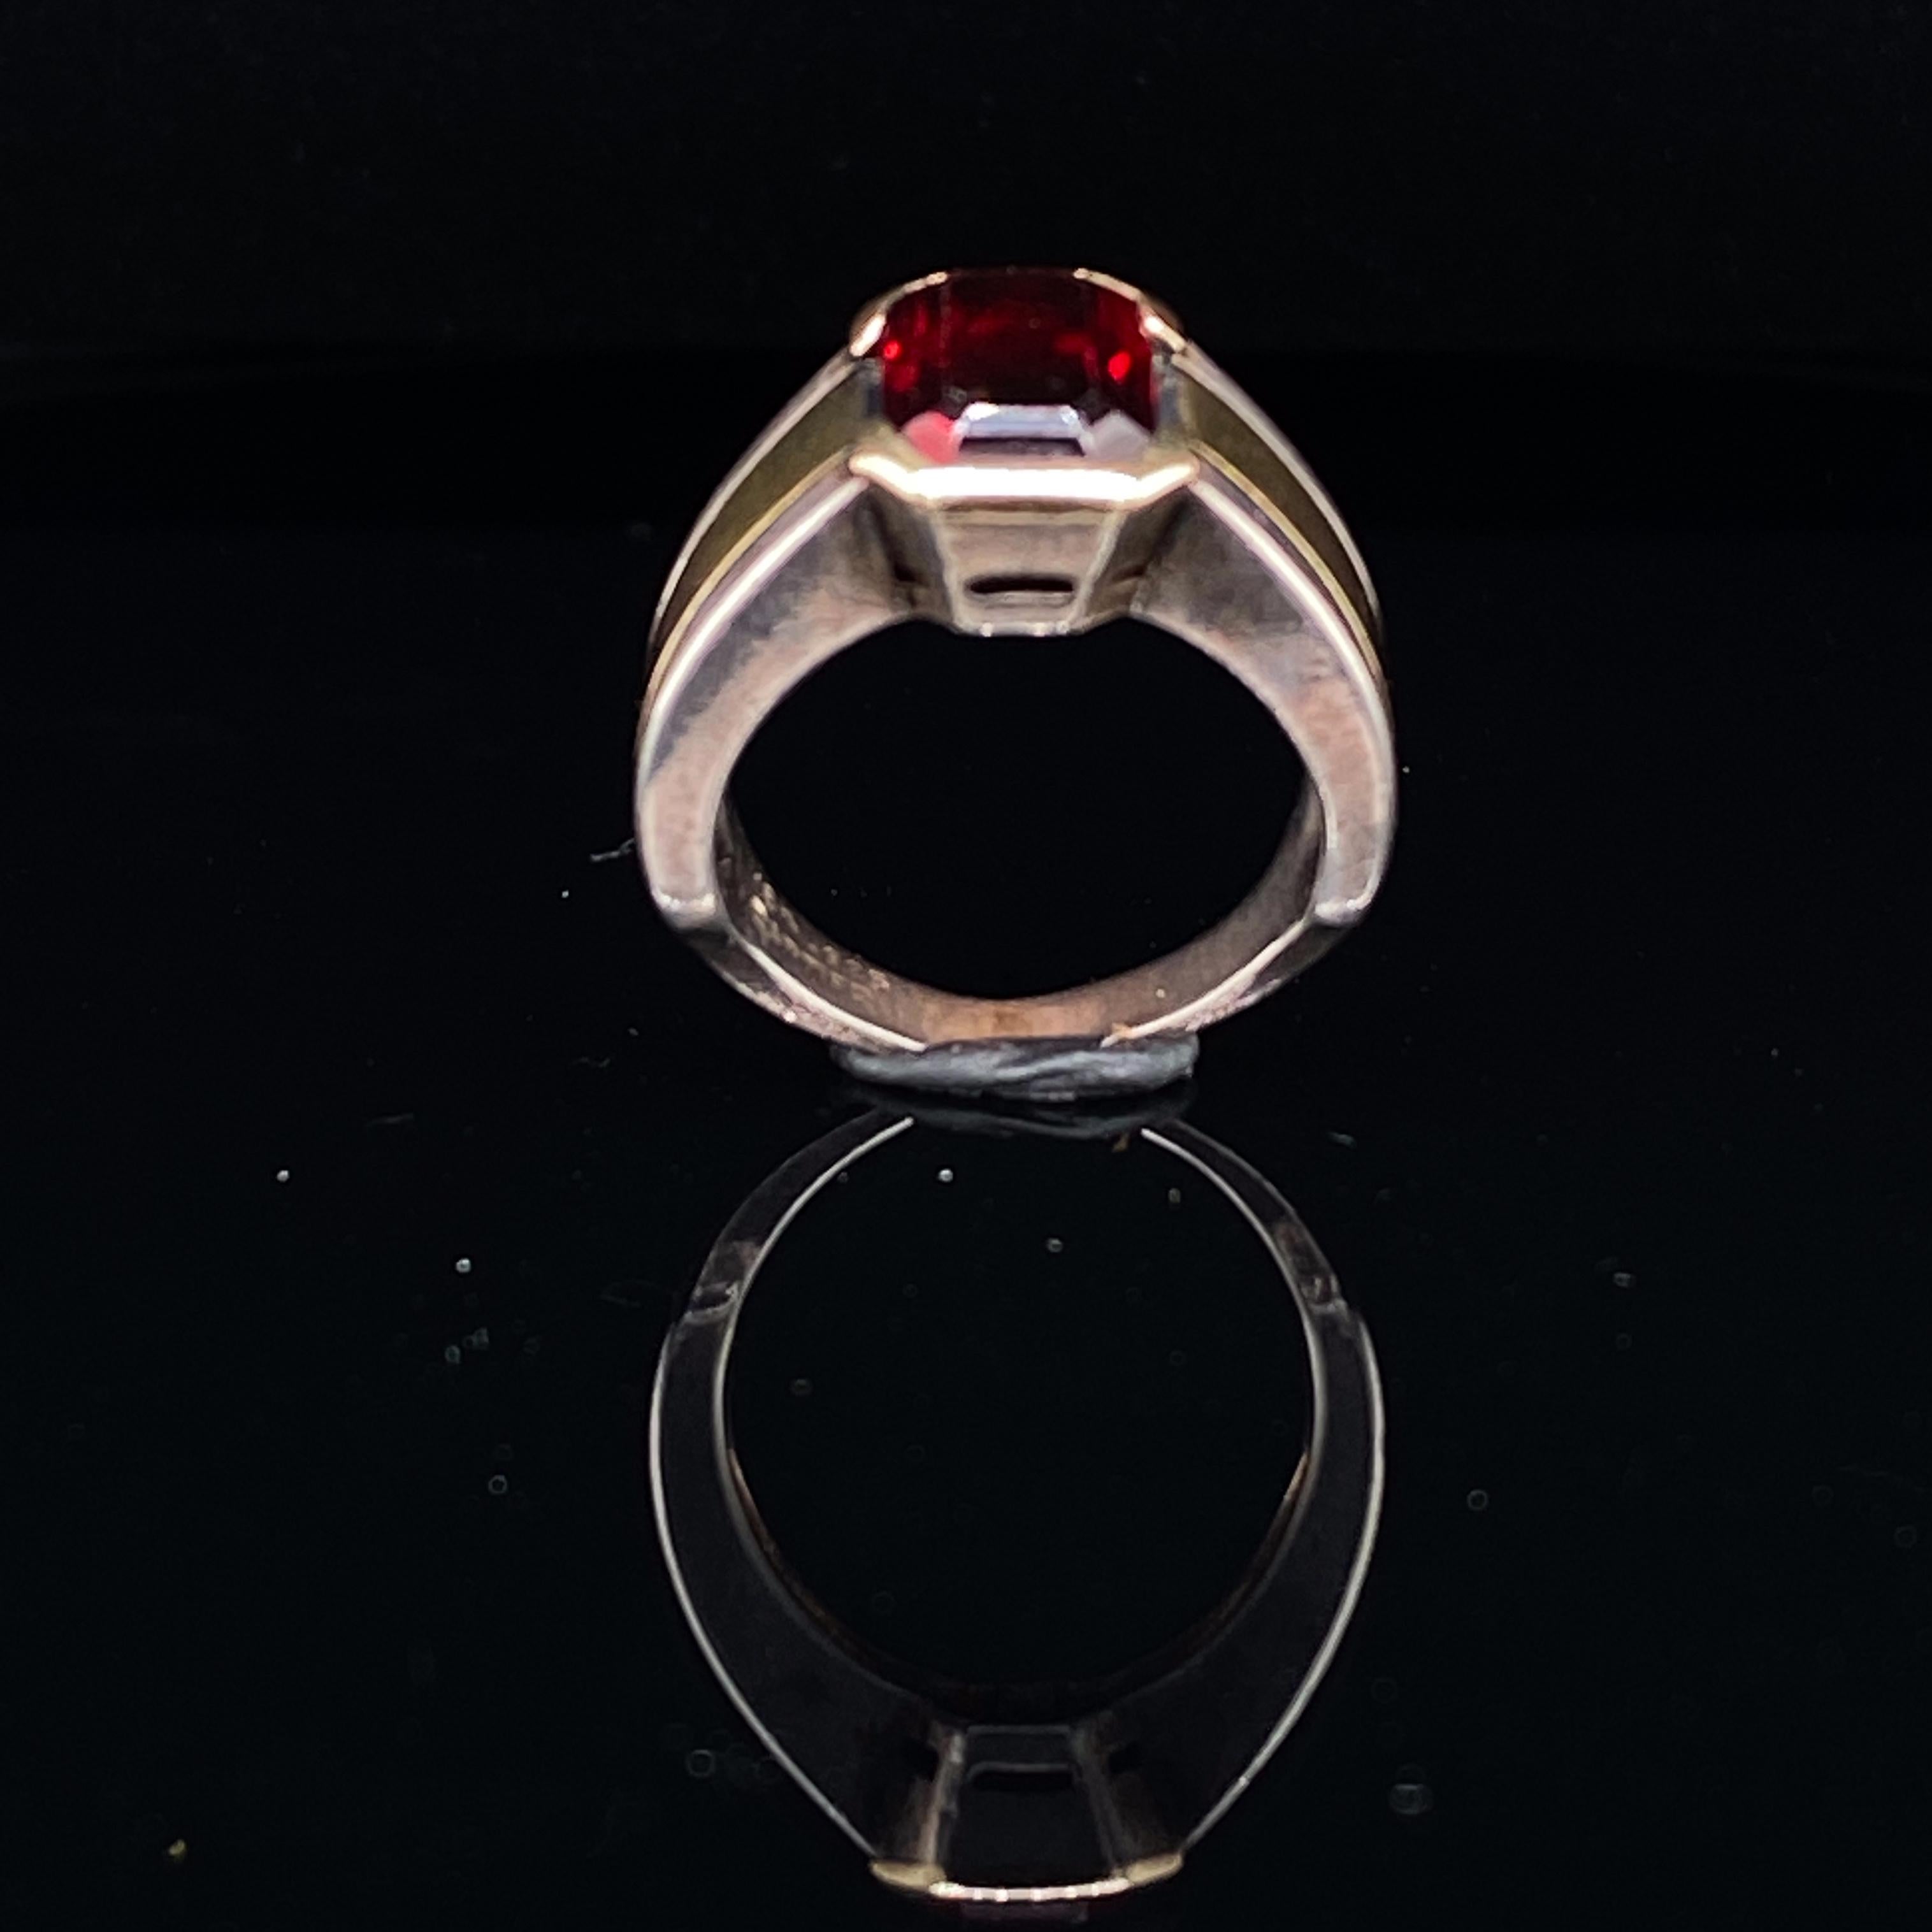 Cartier garnet ring in two-tone silver and 18 karat yellow gold, circa 1990.

An incredibly wearable finely crafted Cartier ring in Sterling Silver and 18 Karat yellow gold featuring an emerald cut garnet to its centre.

The garnet is 1.50 carat